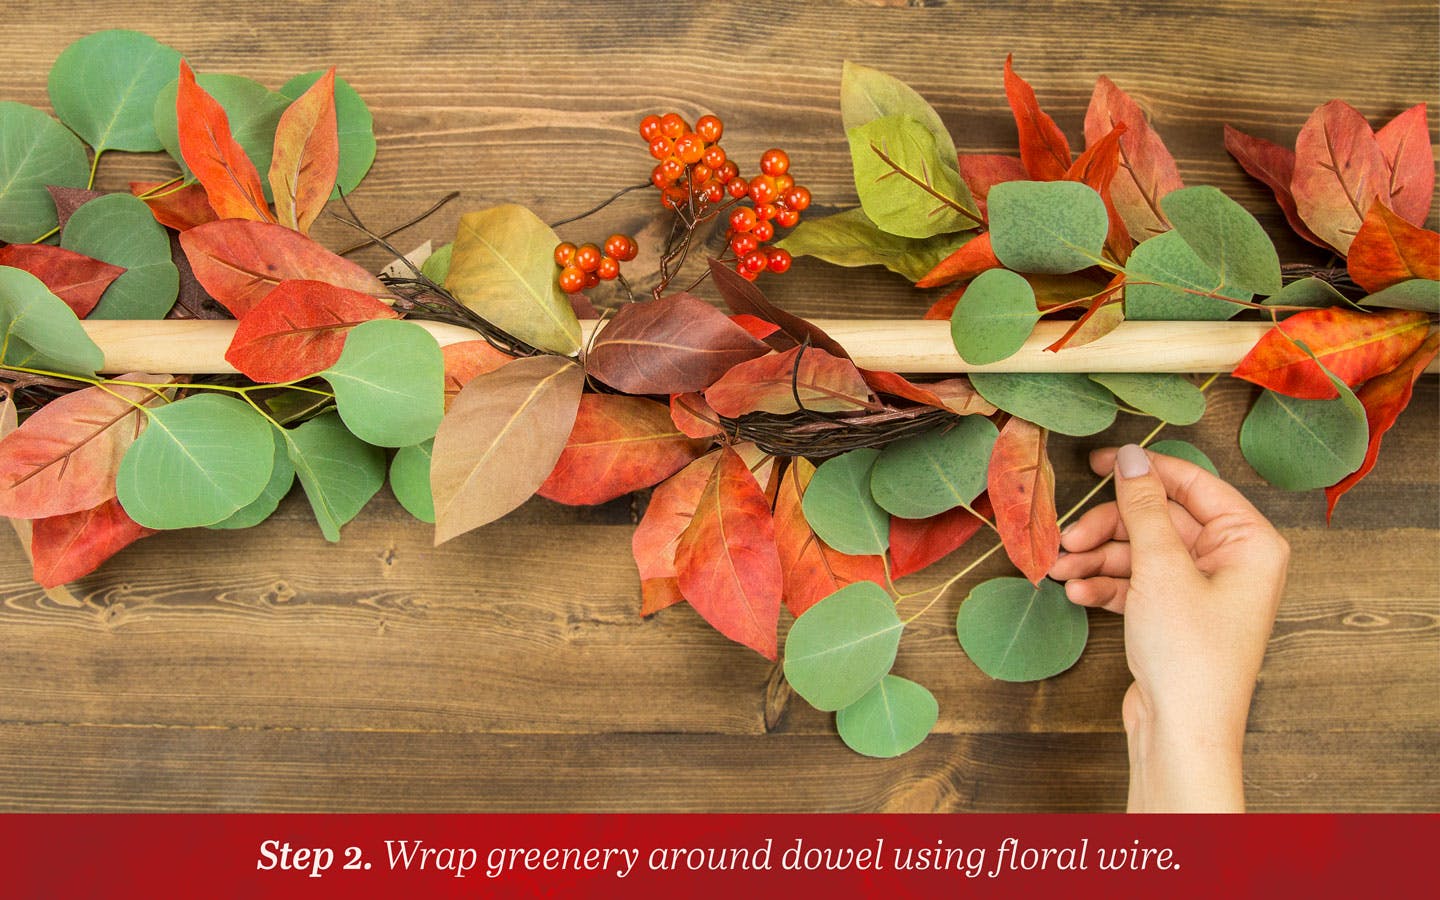 Step 2: Wrap greenery around wooden dowel using floral wire.